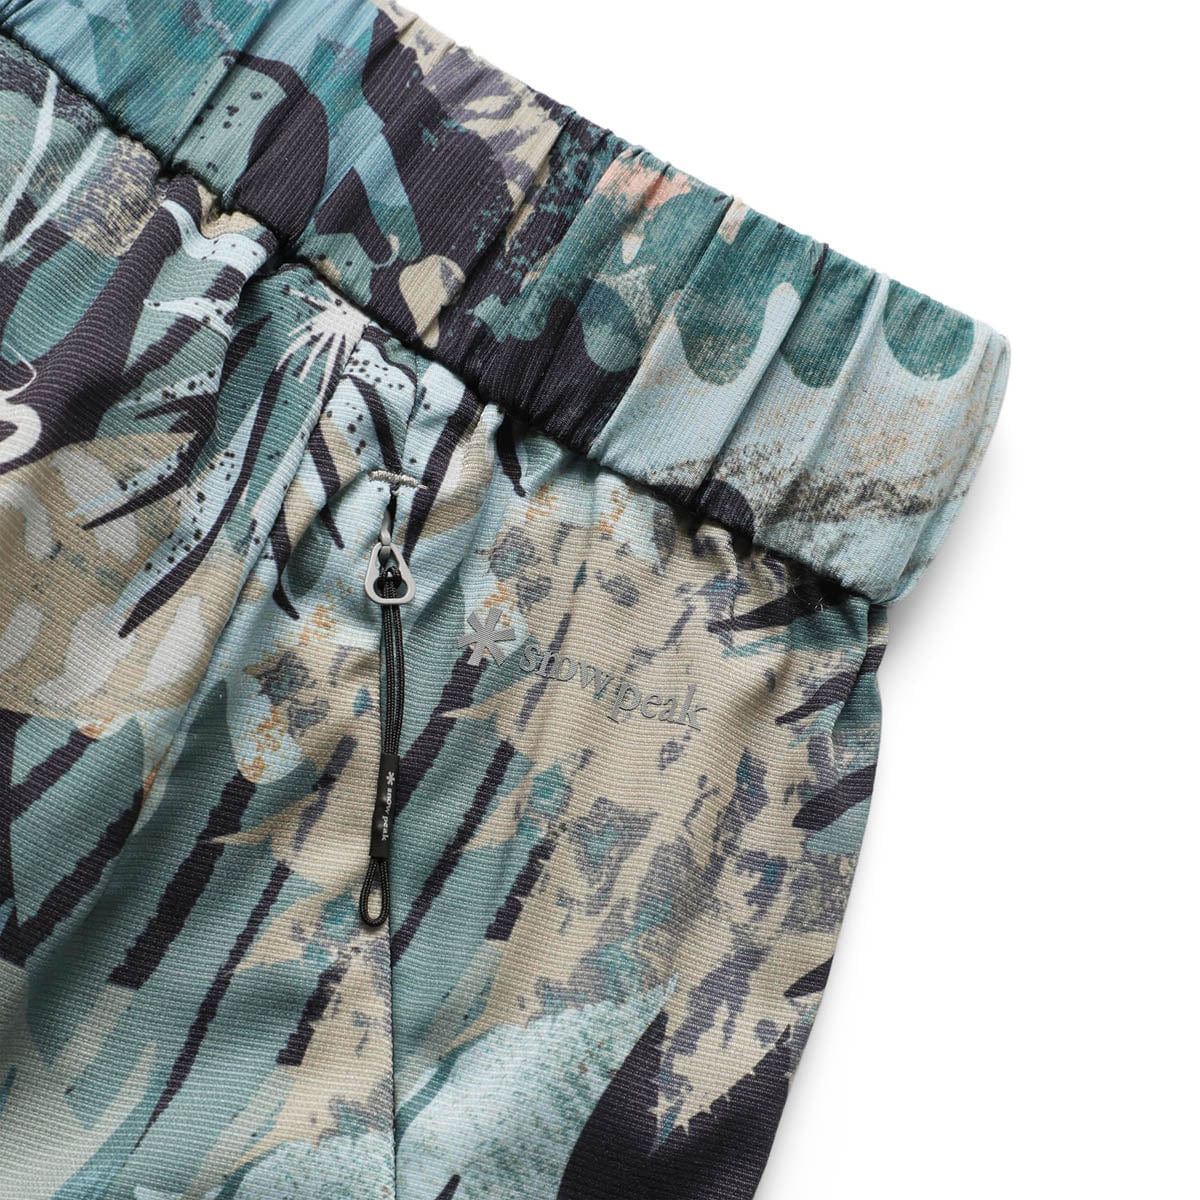 PRINTED BREATHABLE QUICK DRY SHORTS